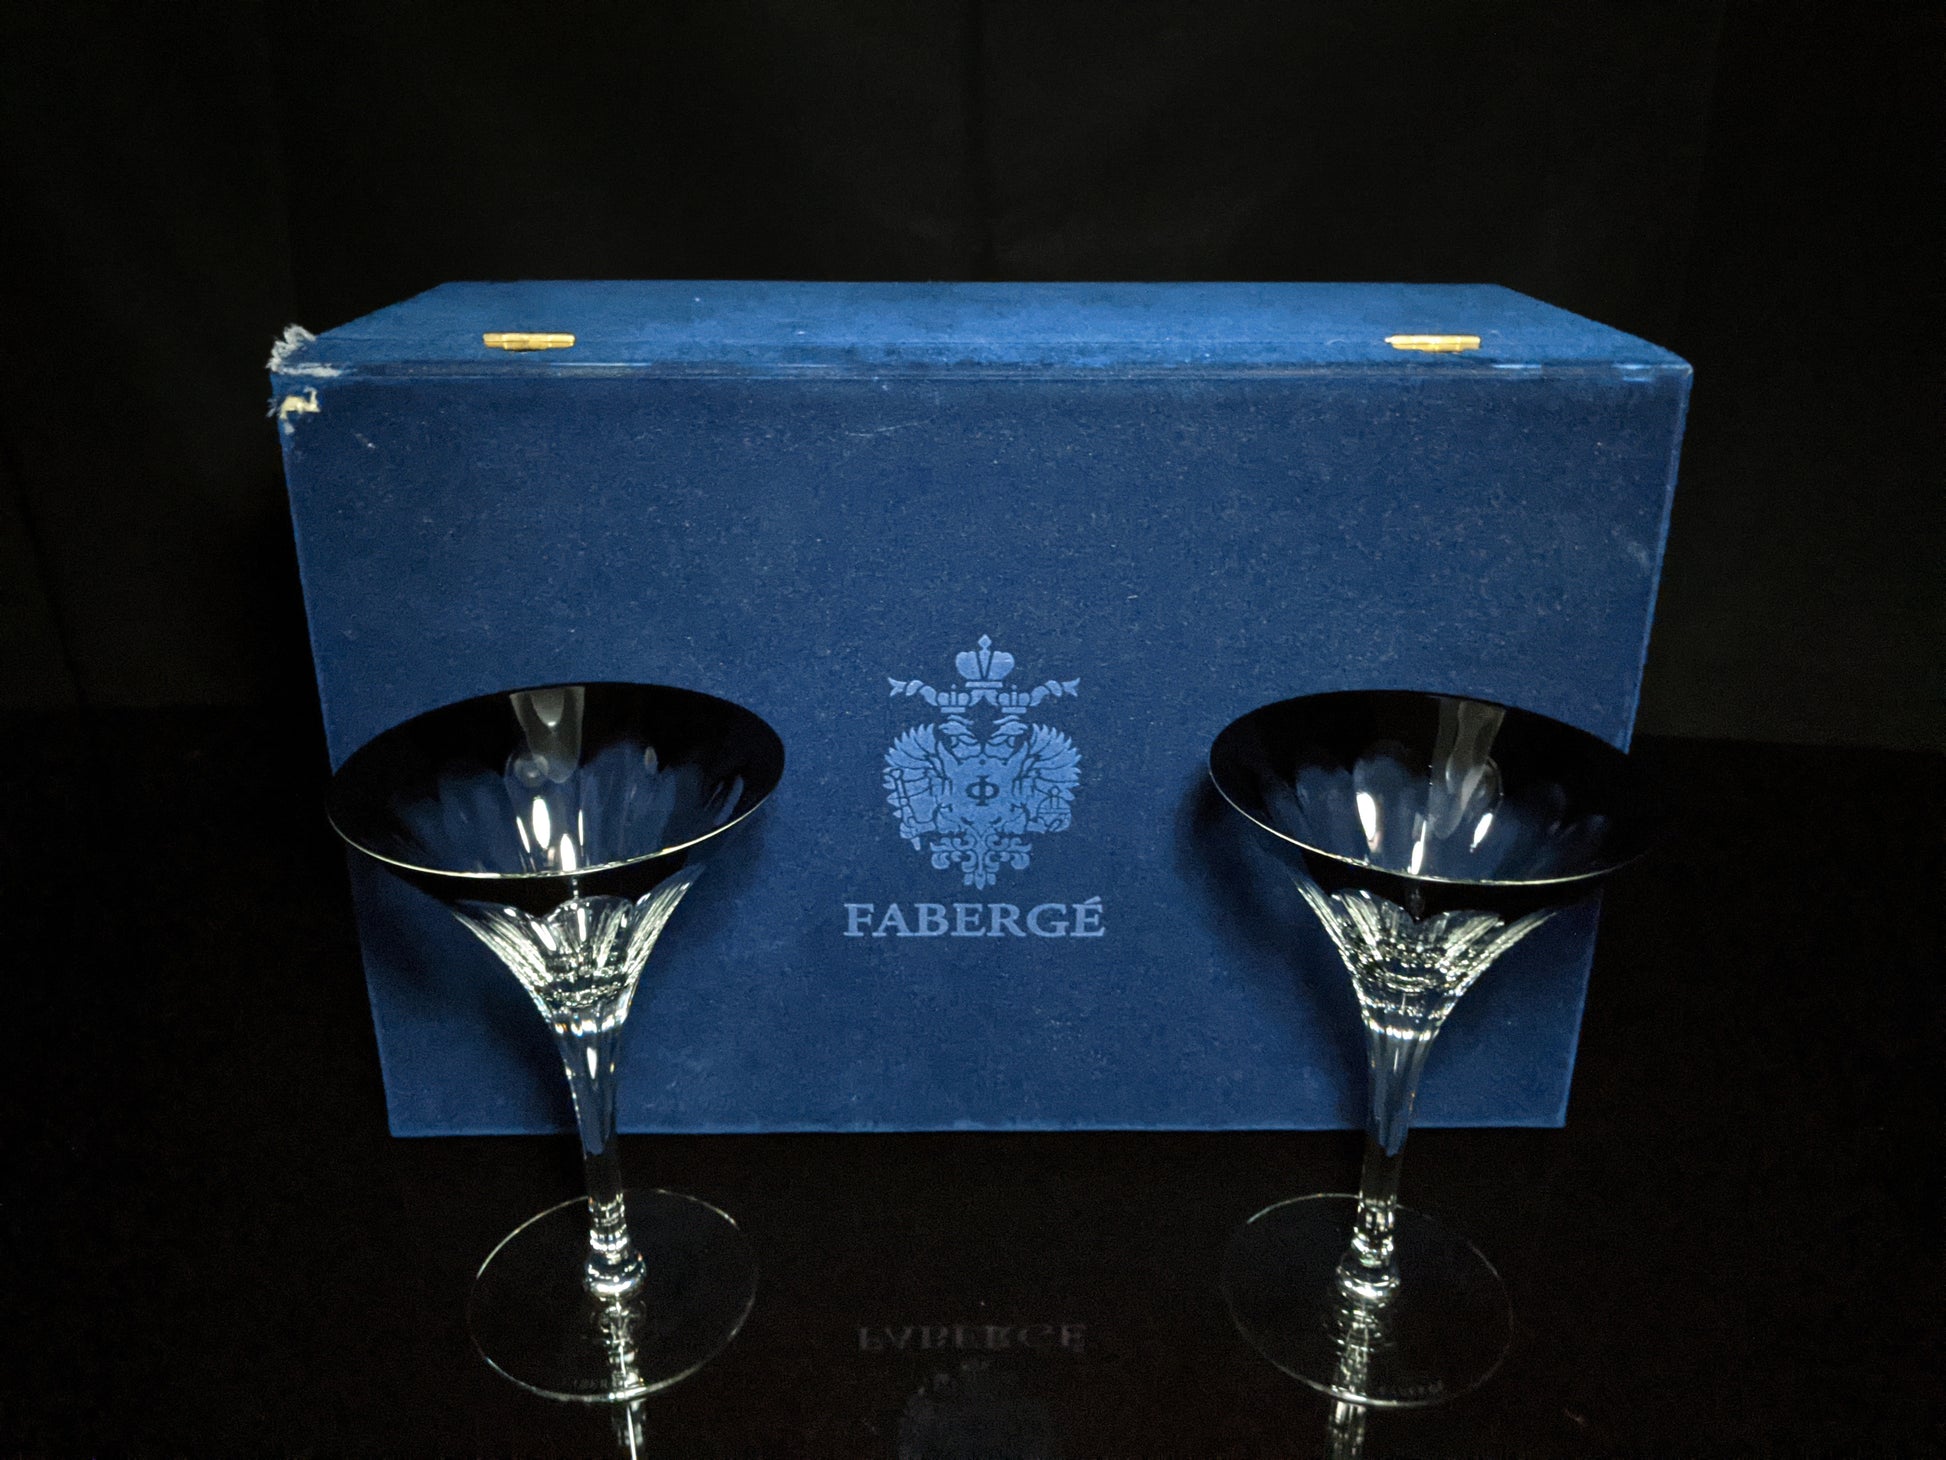 Faberge Martini Black Crystal Glasses set of 2 with the original